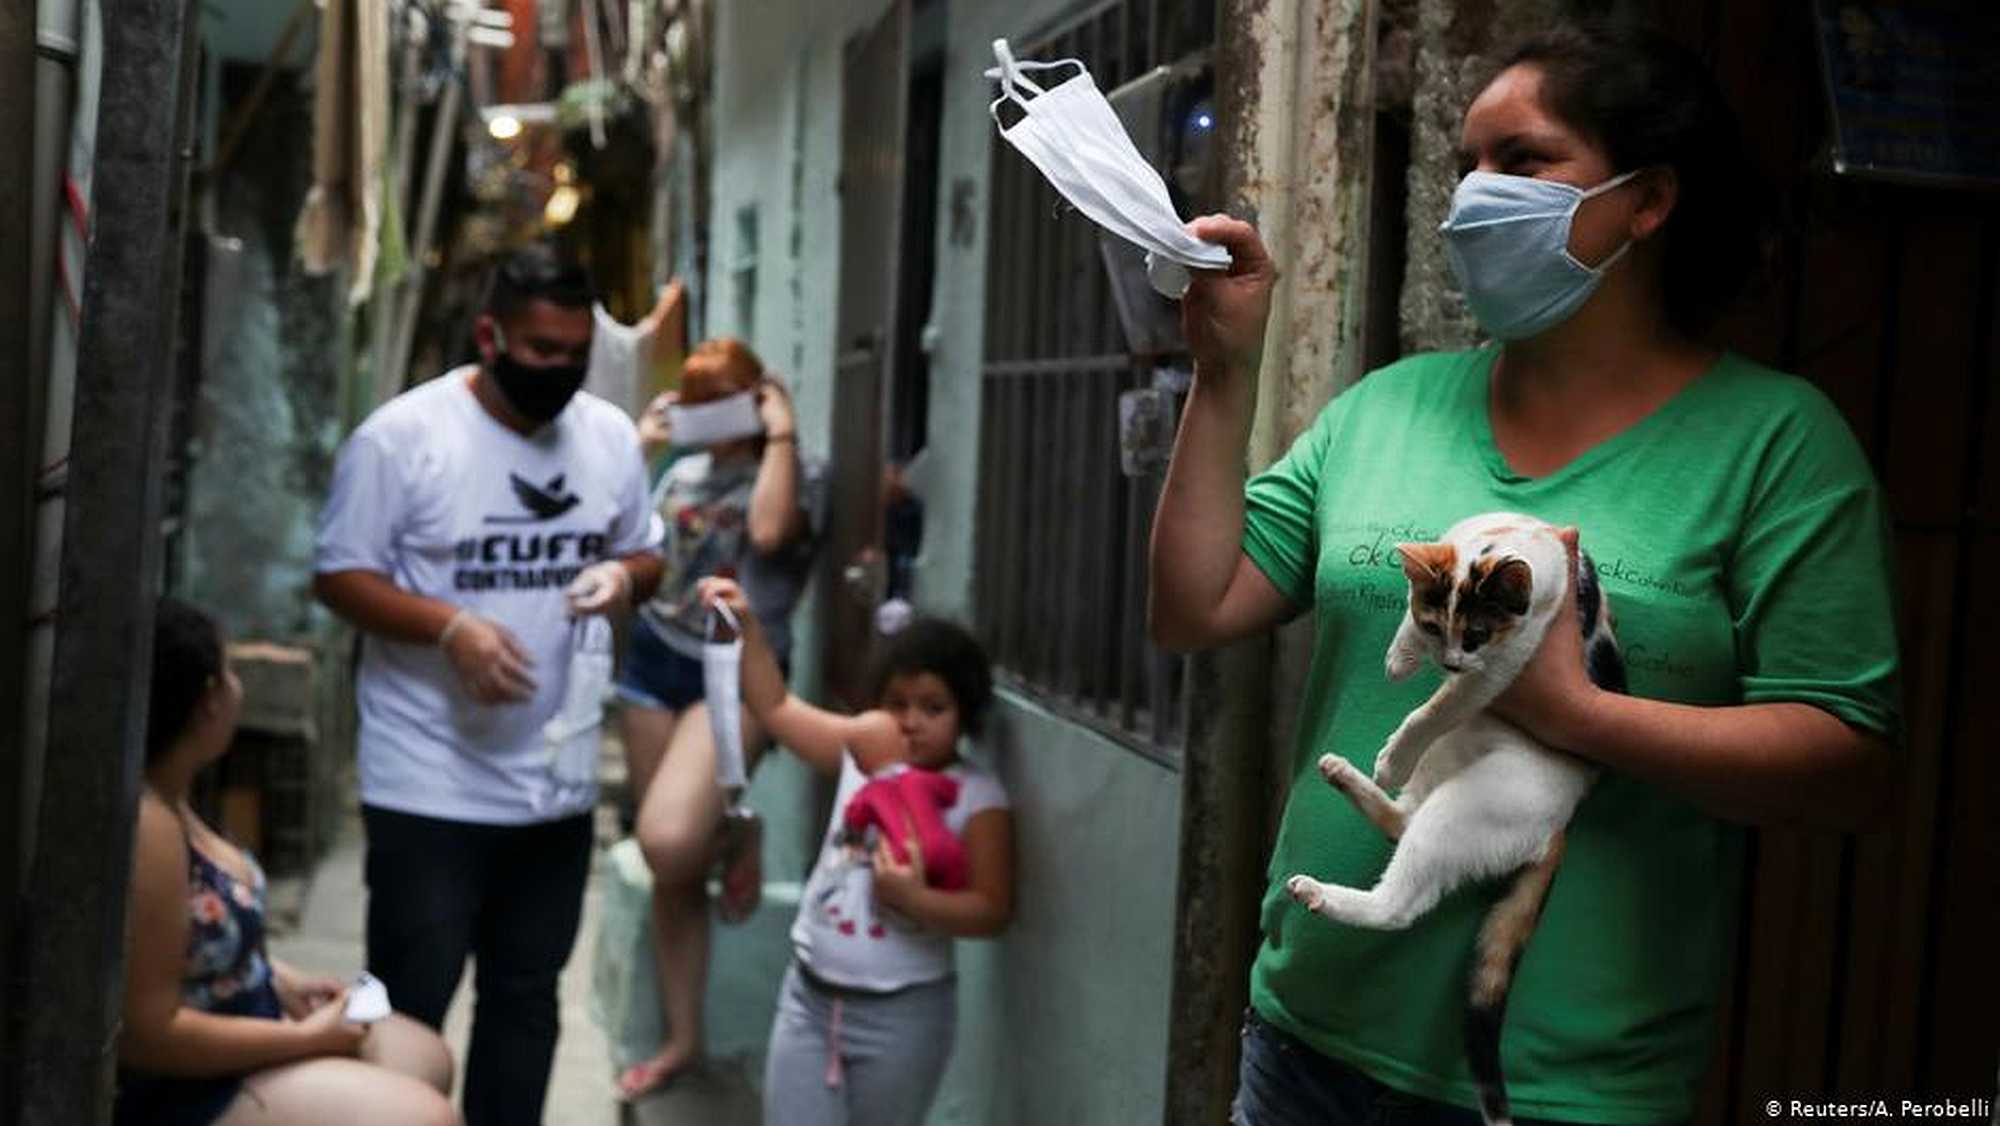 A woman in a favela in São Paulo holds up a facemask (Reuters/A. Perobelli)